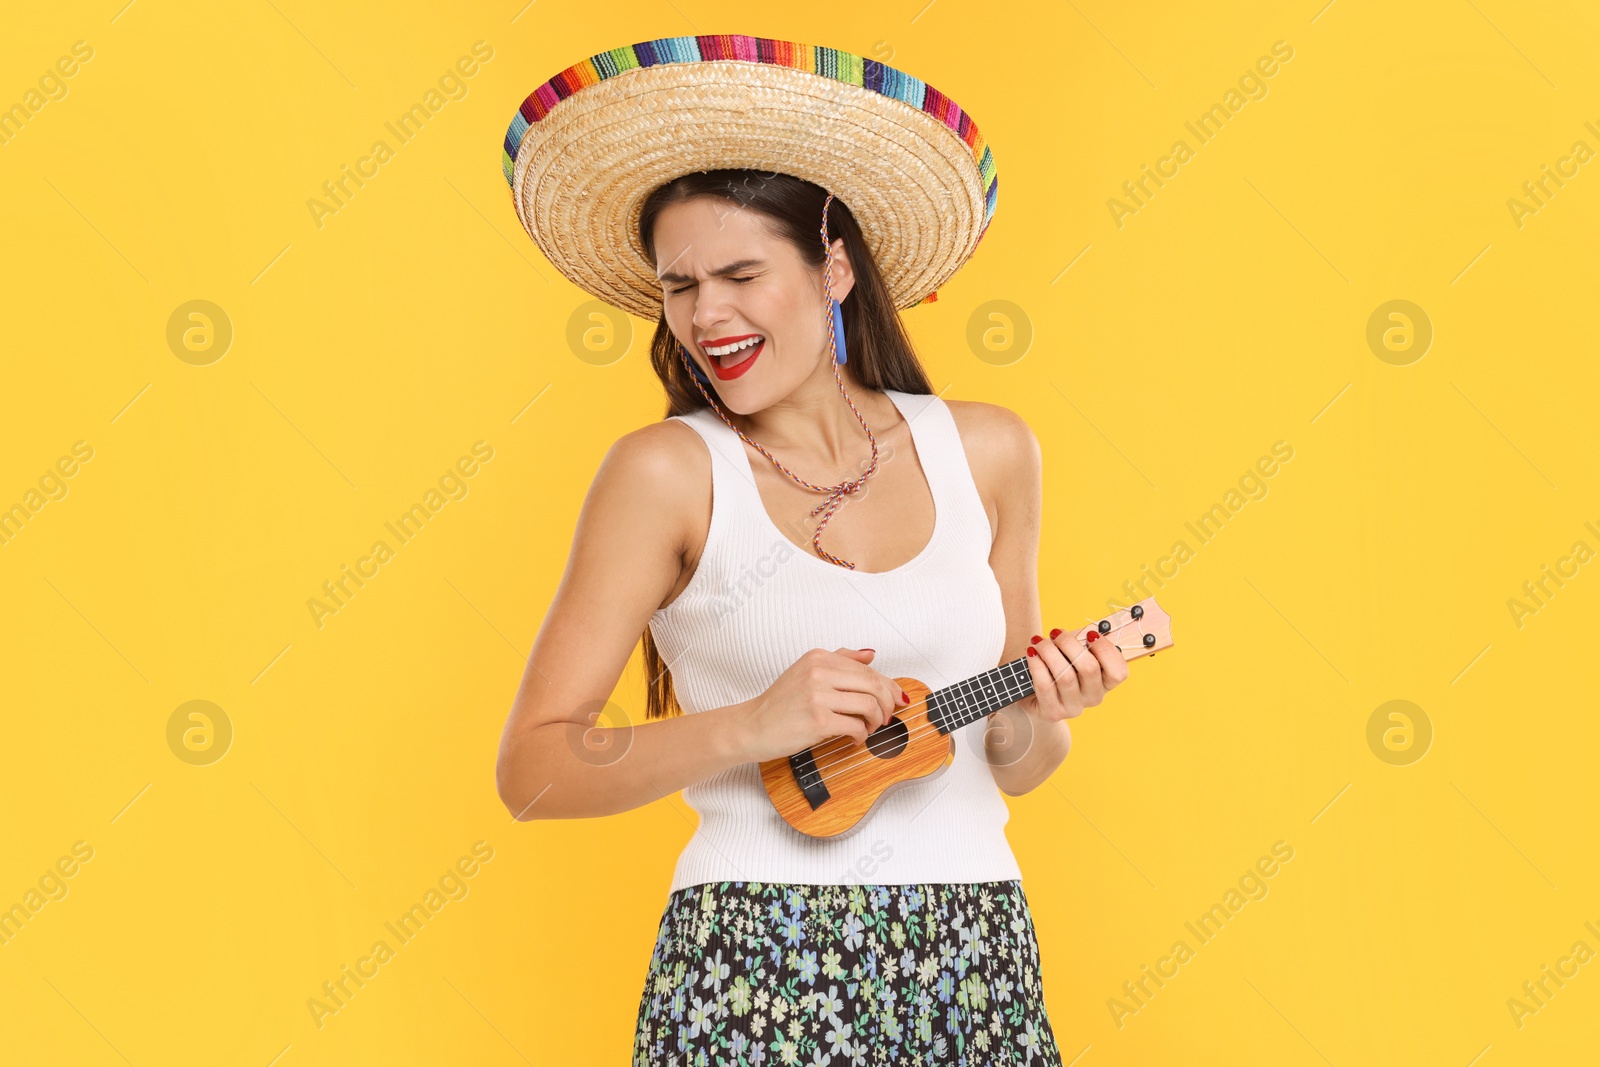 Photo of Young woman in Mexican sombrero hat playing ukulele on yellow background